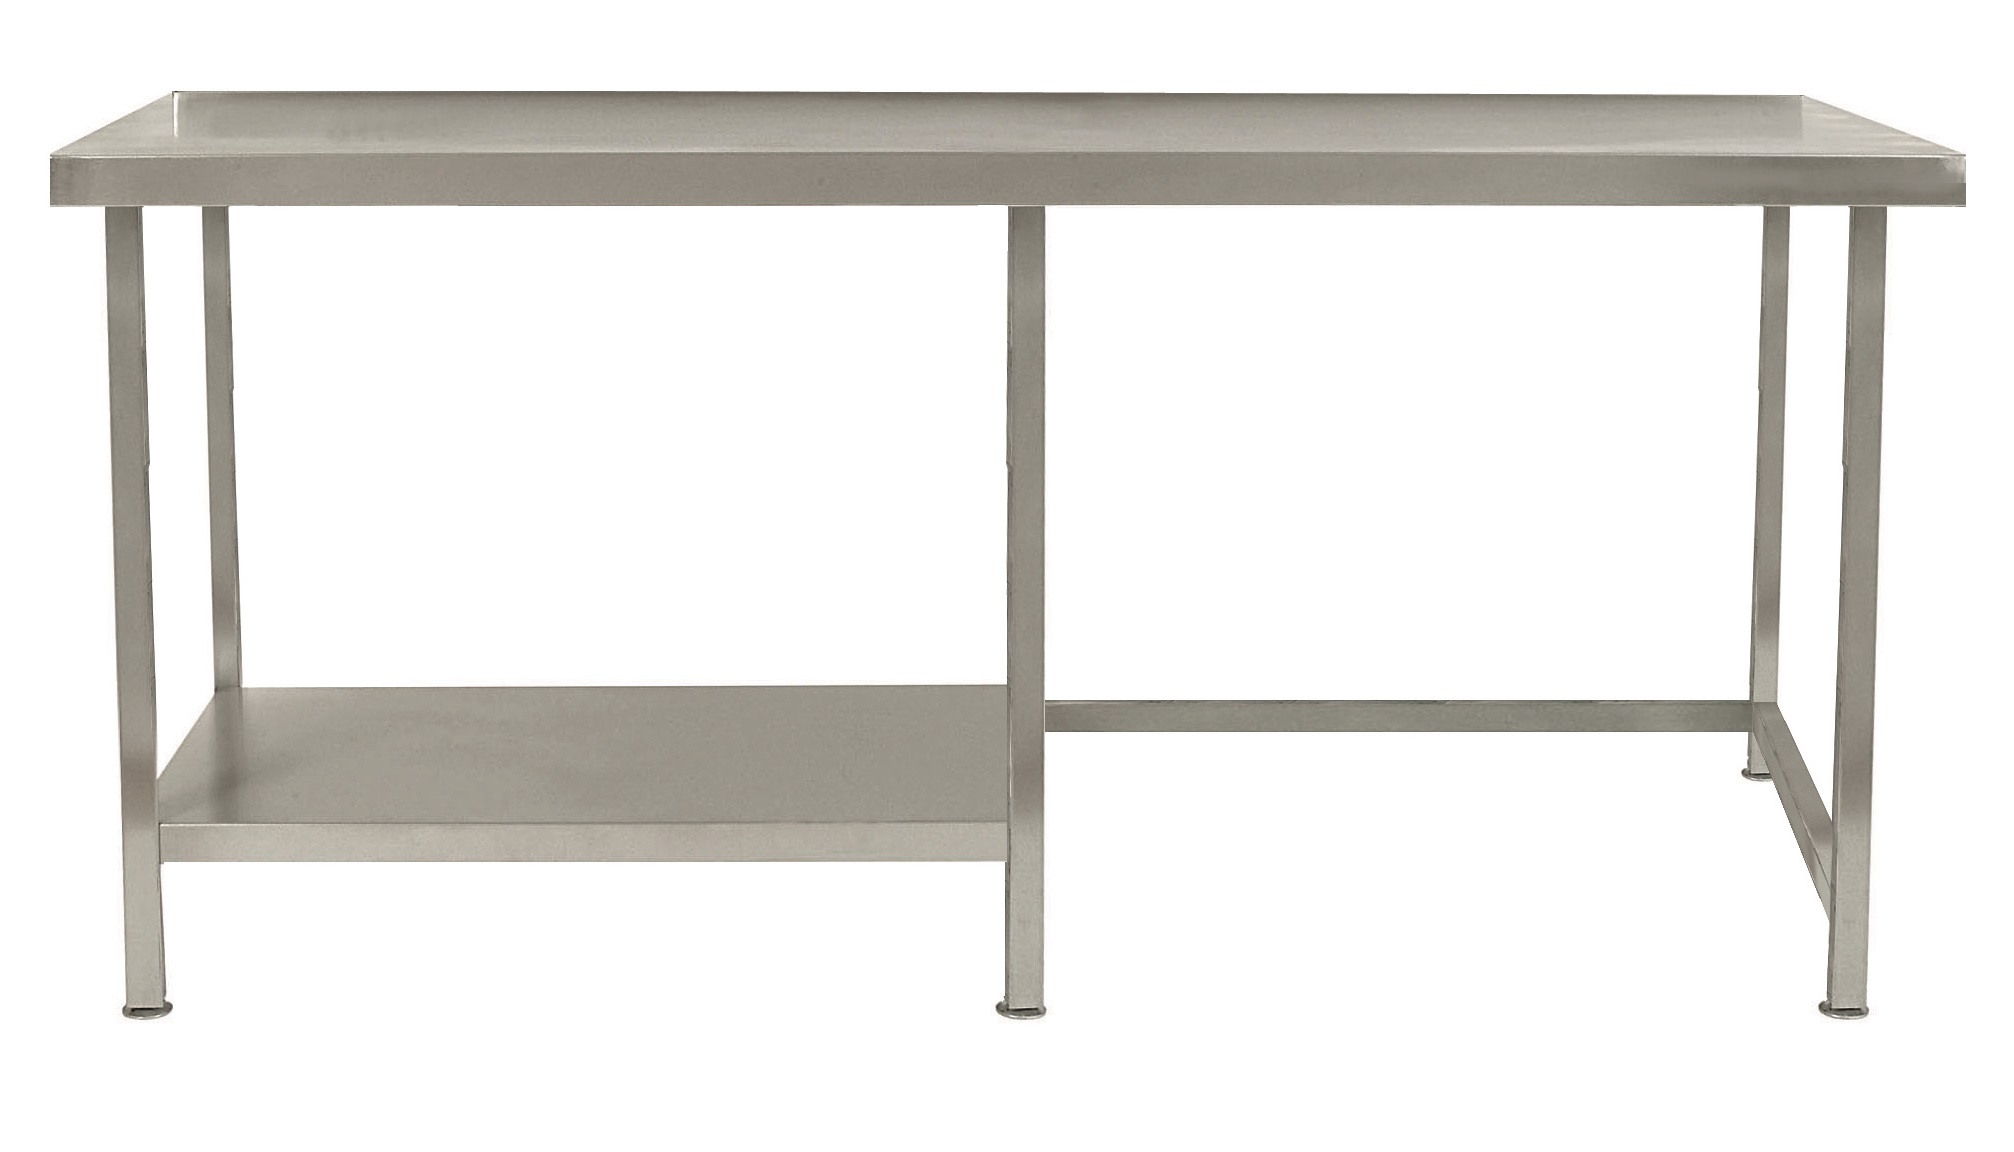 Parry TABHLW - Stainless Steel Table With Part Undershelf Left Hand Side Wall